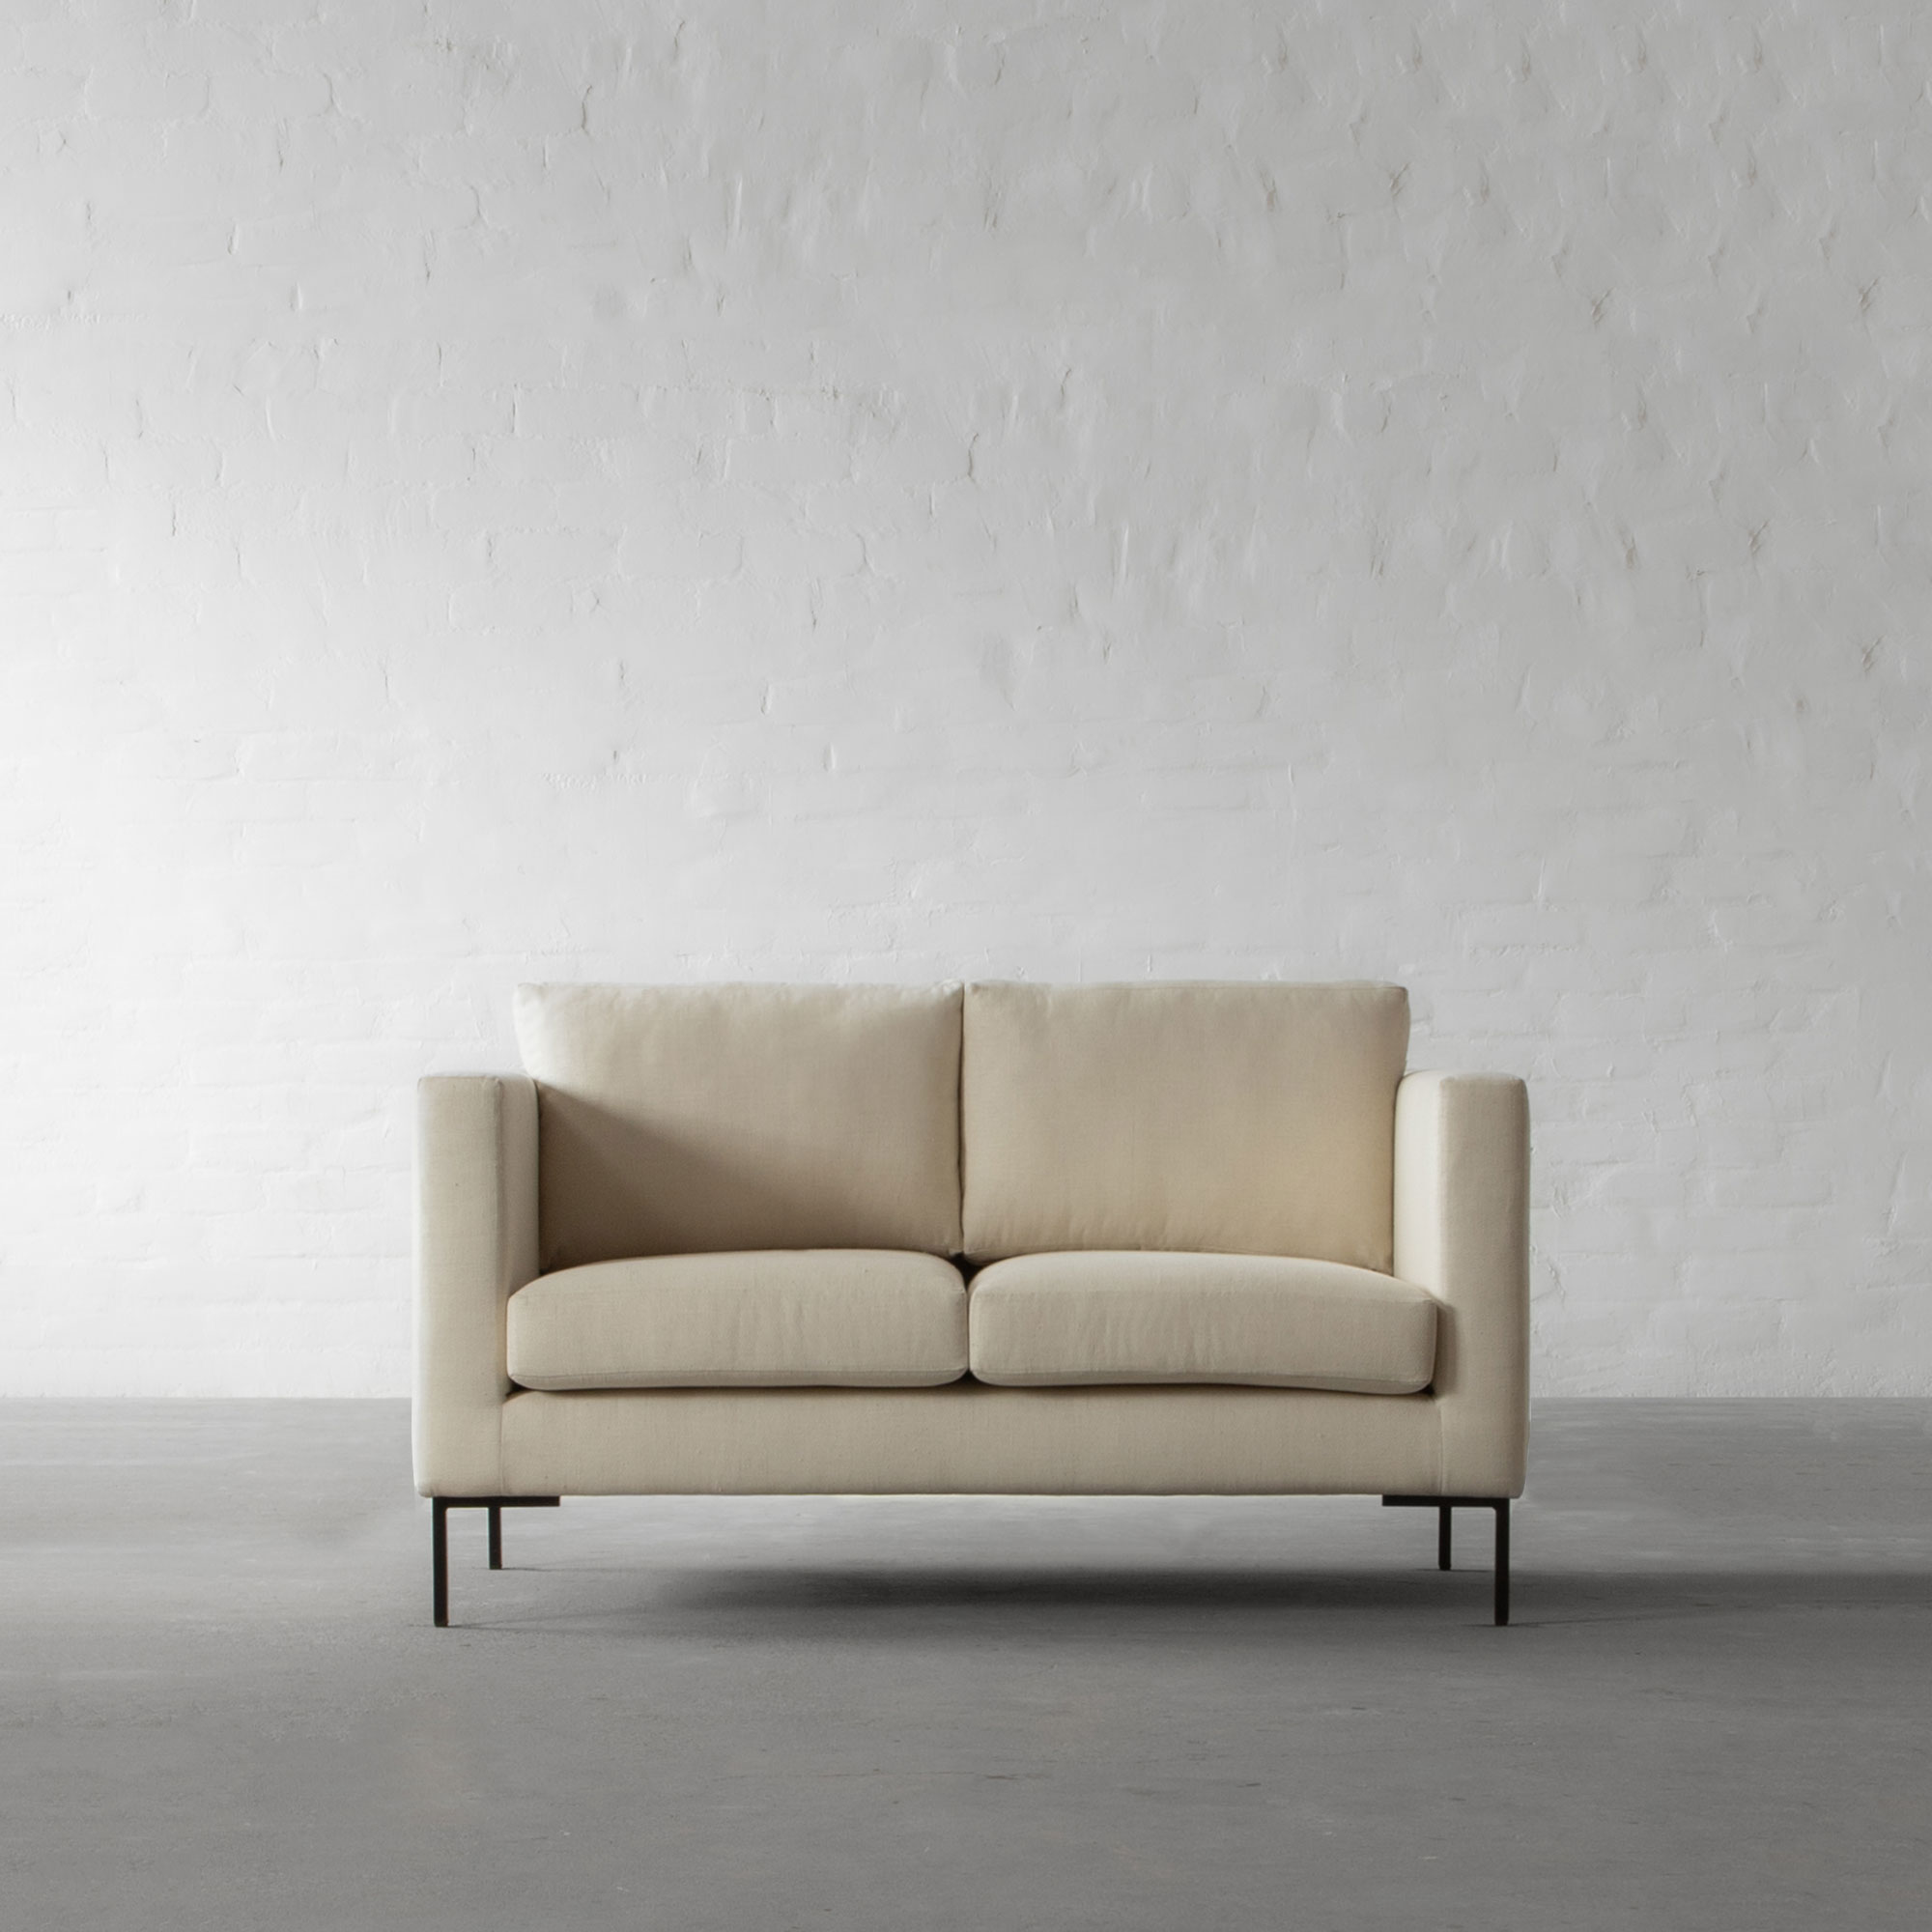 L.A. Sofa Collection